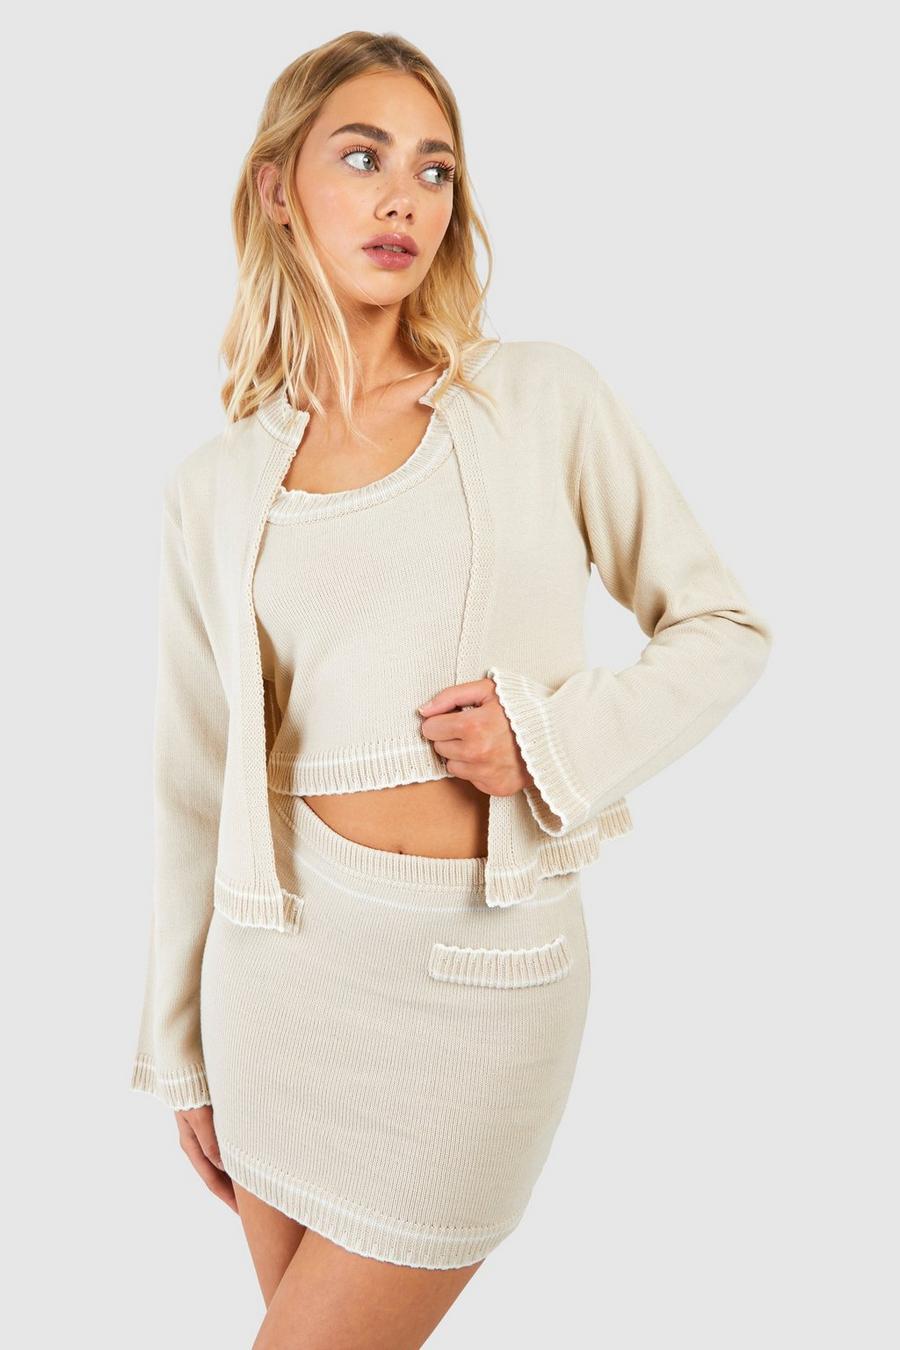 Stone Contrast Stitch 3 Piece Knitted Cardigan, Crop Top And Mini Skirt Set